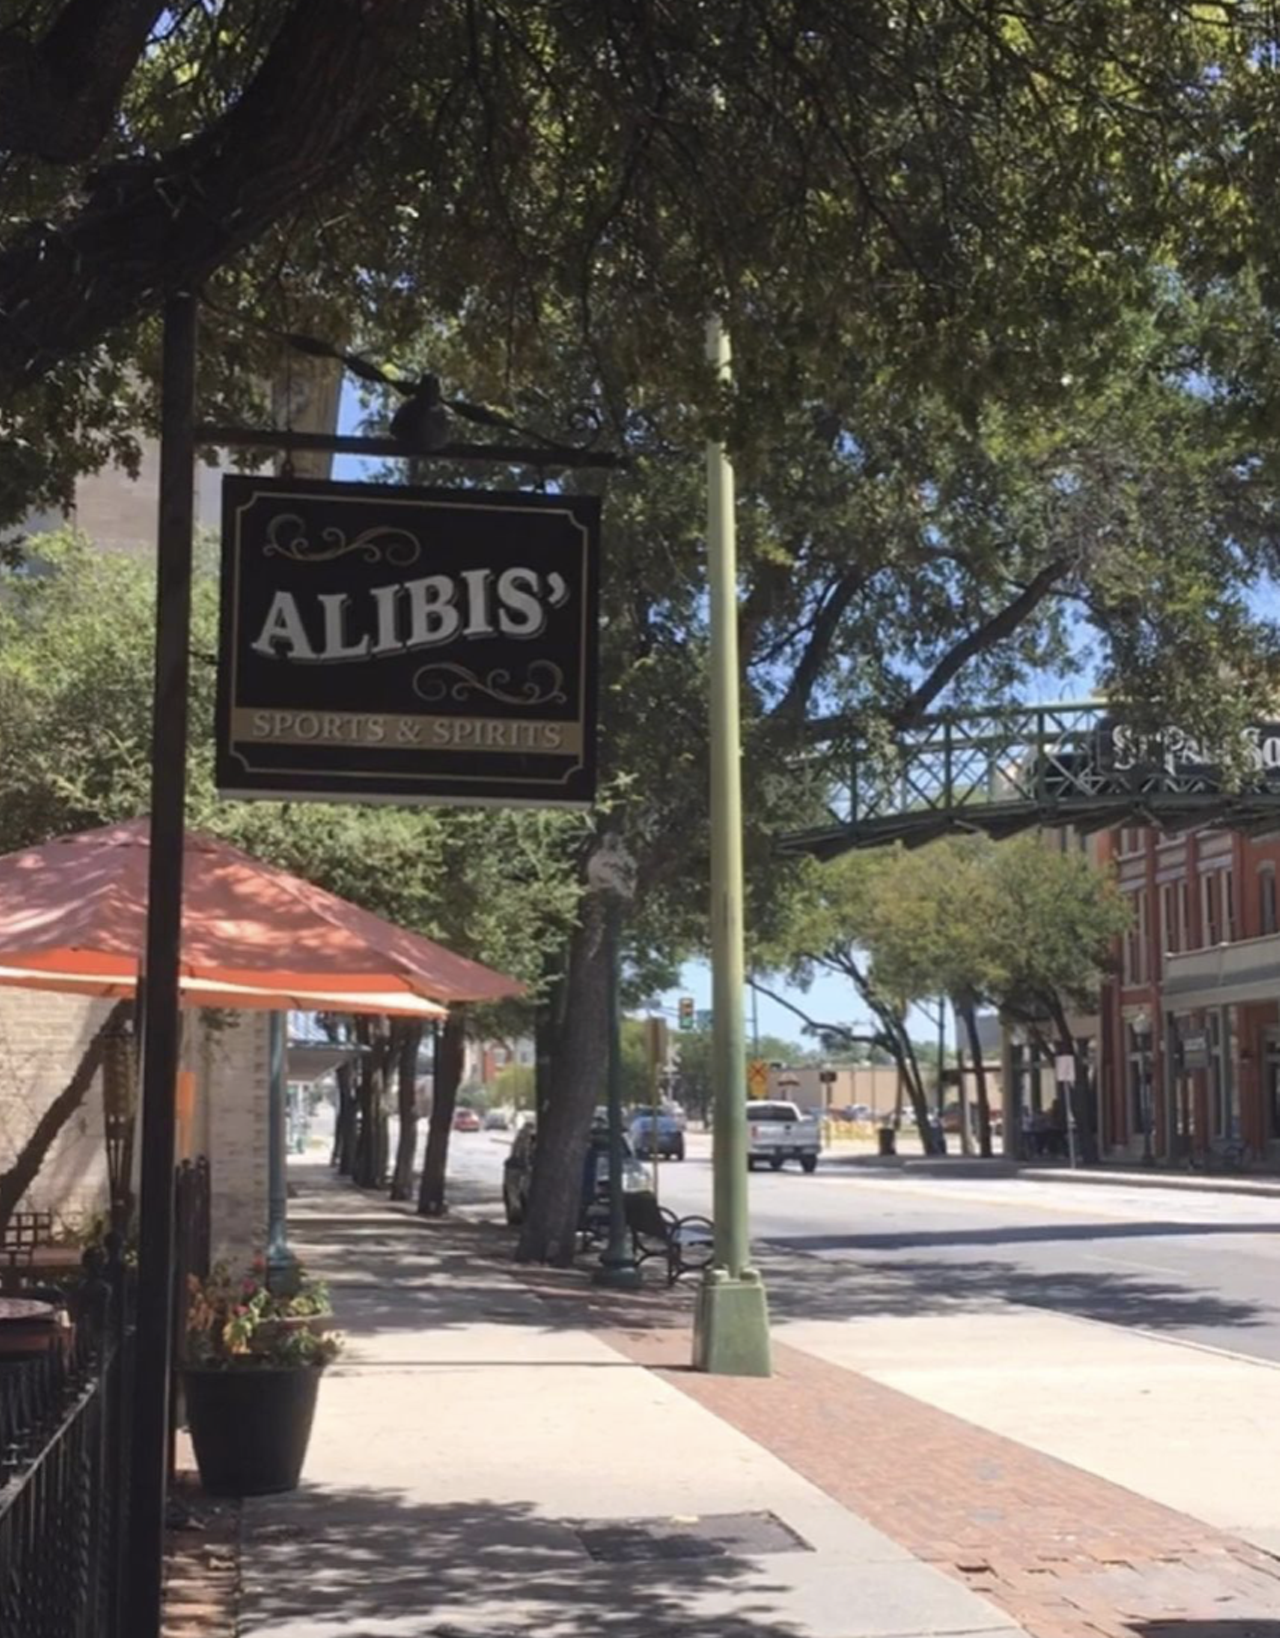 Alibis Sports and Spirits
1141 E Commerce St, (210) 225-5552, instagram.com/alibissportsandspirits
Tucked away from the hustle and bustle of the Alamo City’s tourist spots, Alibis’ offers a laid back atmosphere with great drinks for anyone looking to wind down.
Photo via Instagram / fatsauceband